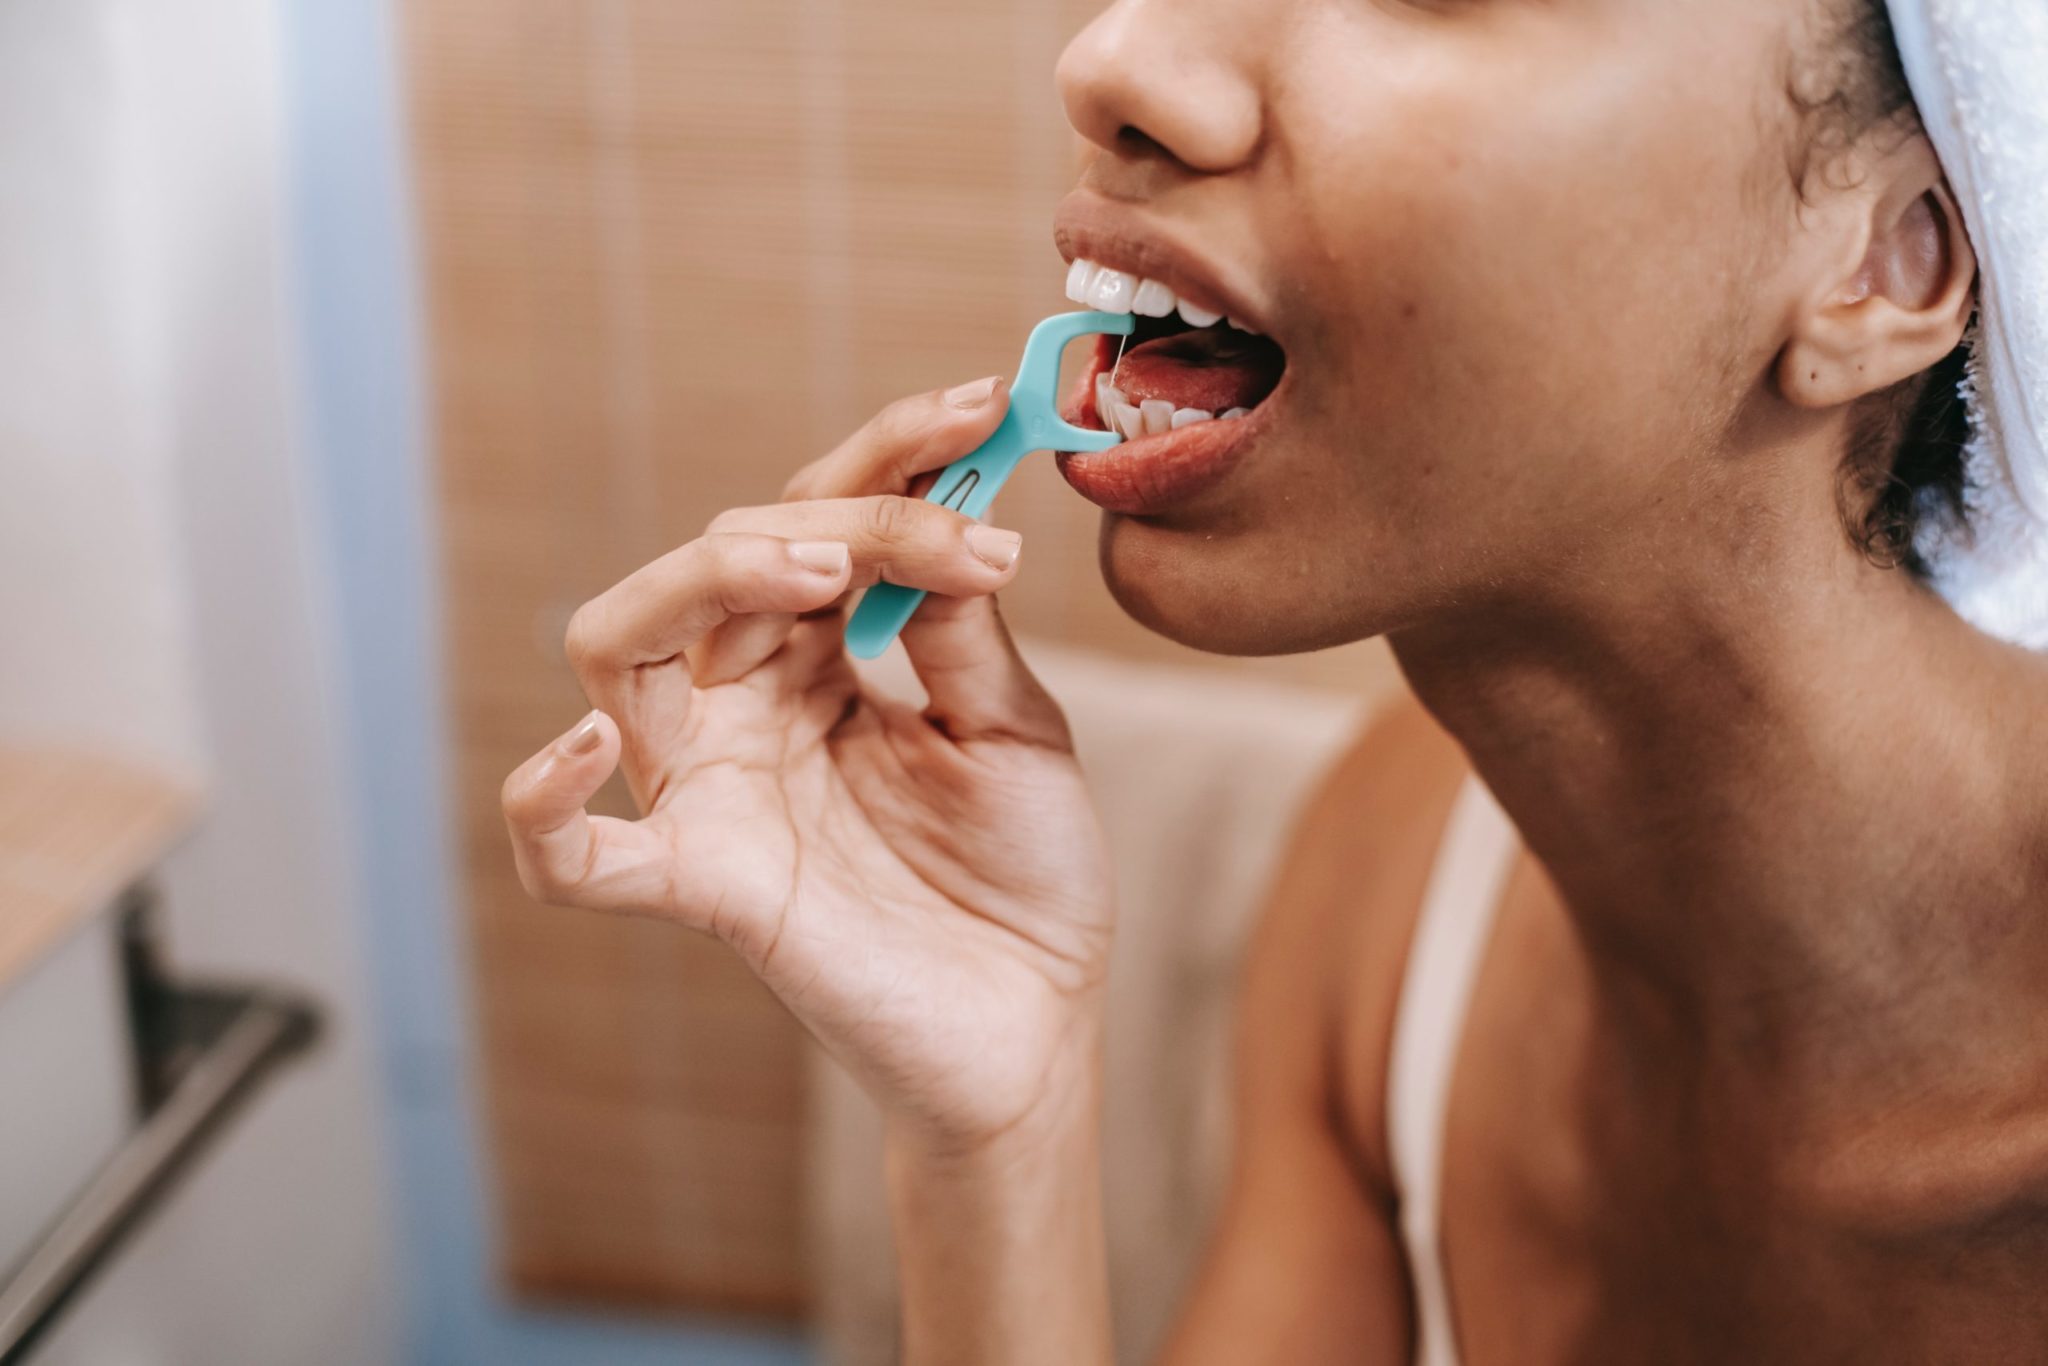 A woman cleans her teeth with a floss pick.